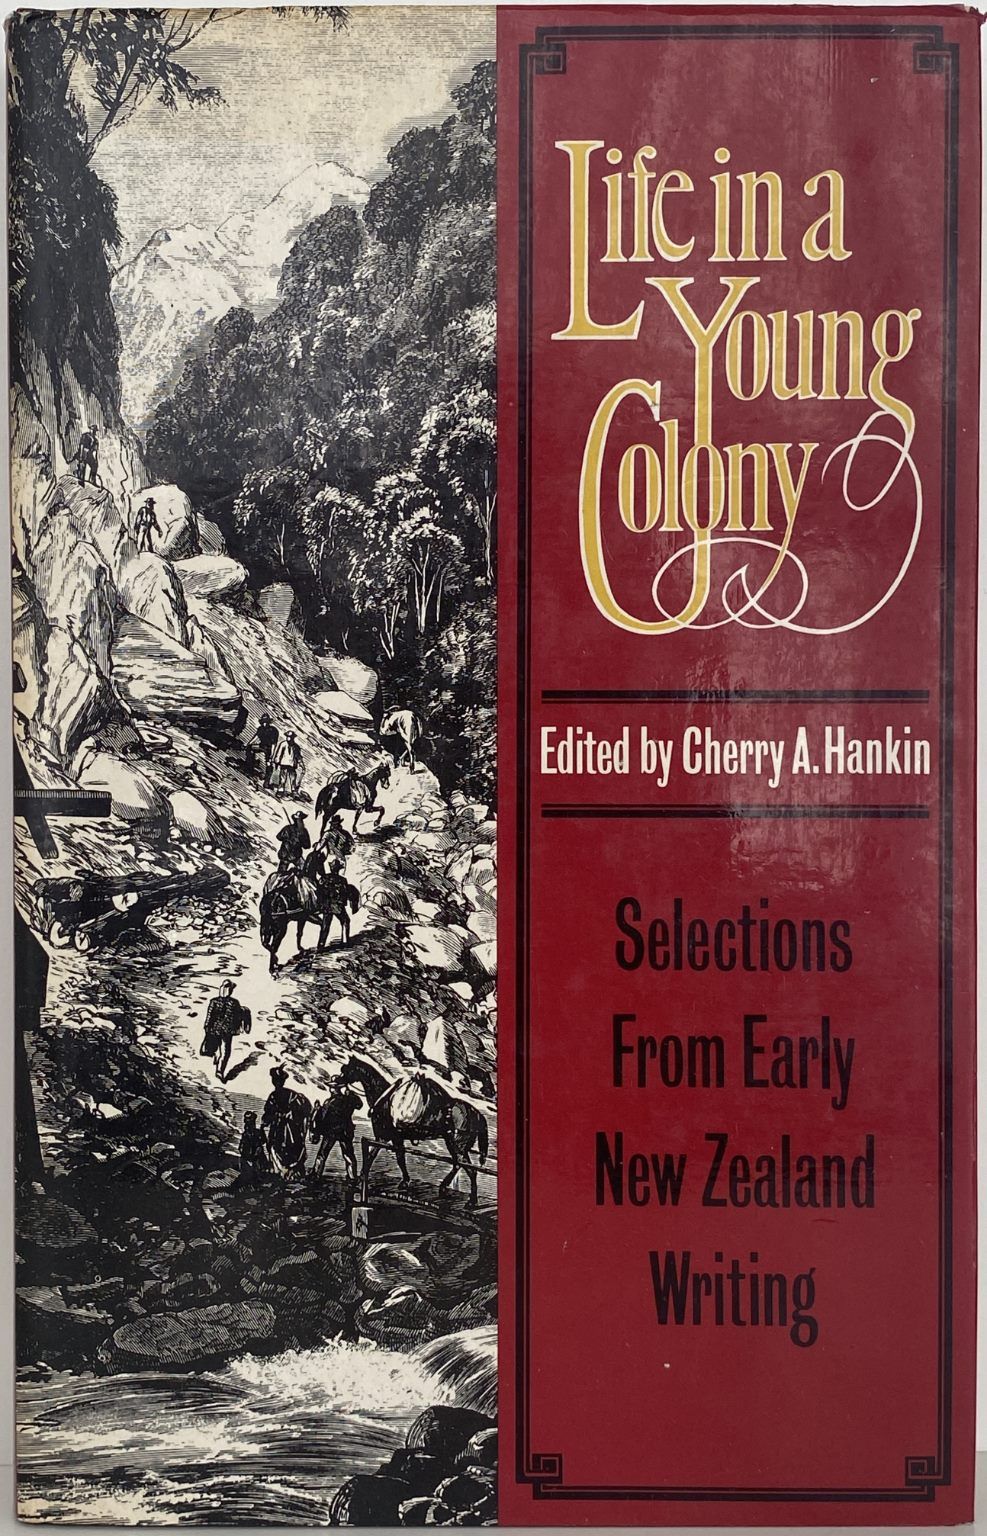 LIFE IN A YOUNG COLONY: Selections from early New Zealand Writing